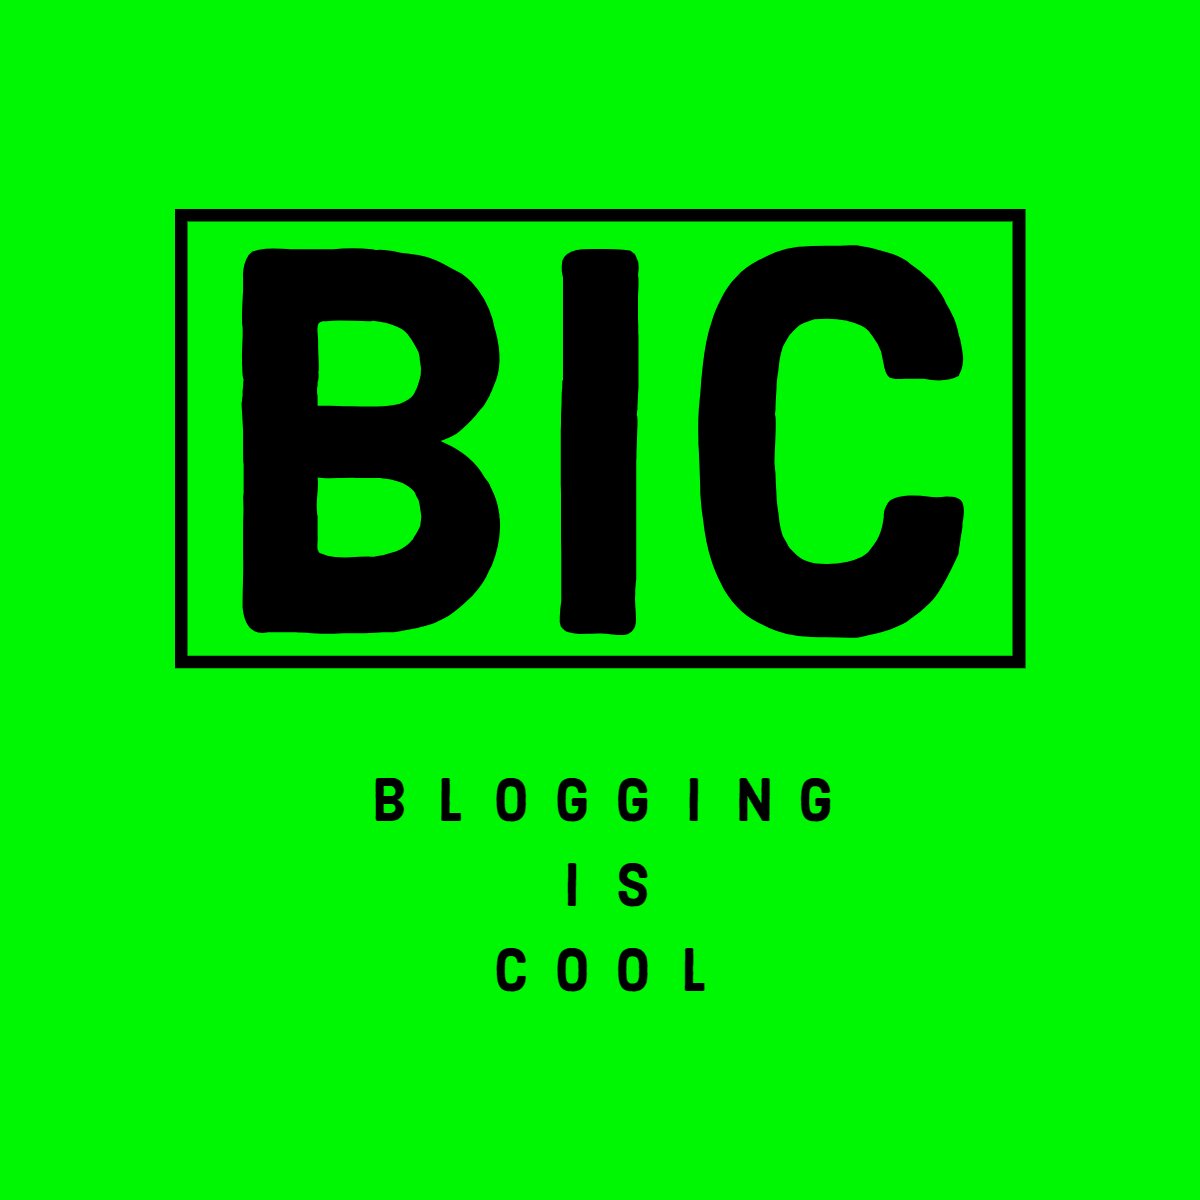 What are the costs associated with blogging?